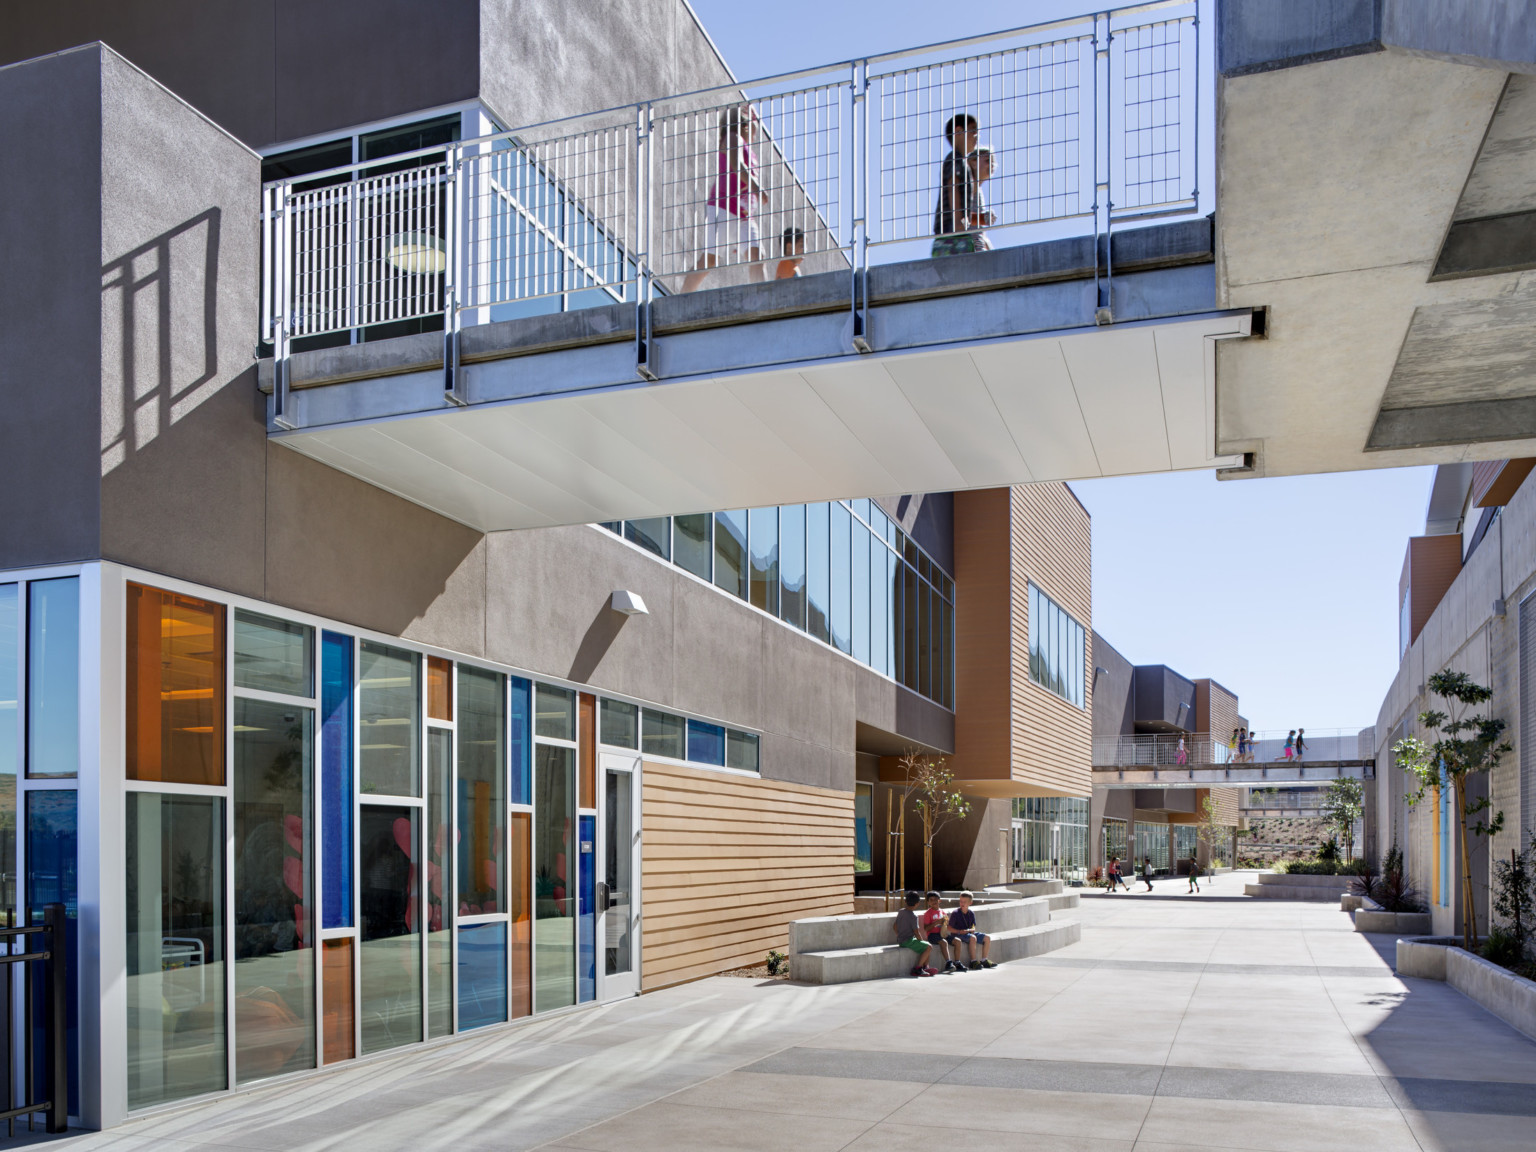 Breezeway between multistory buildings with bridges connecting them. Blue and orange window panes below, wood panel accents